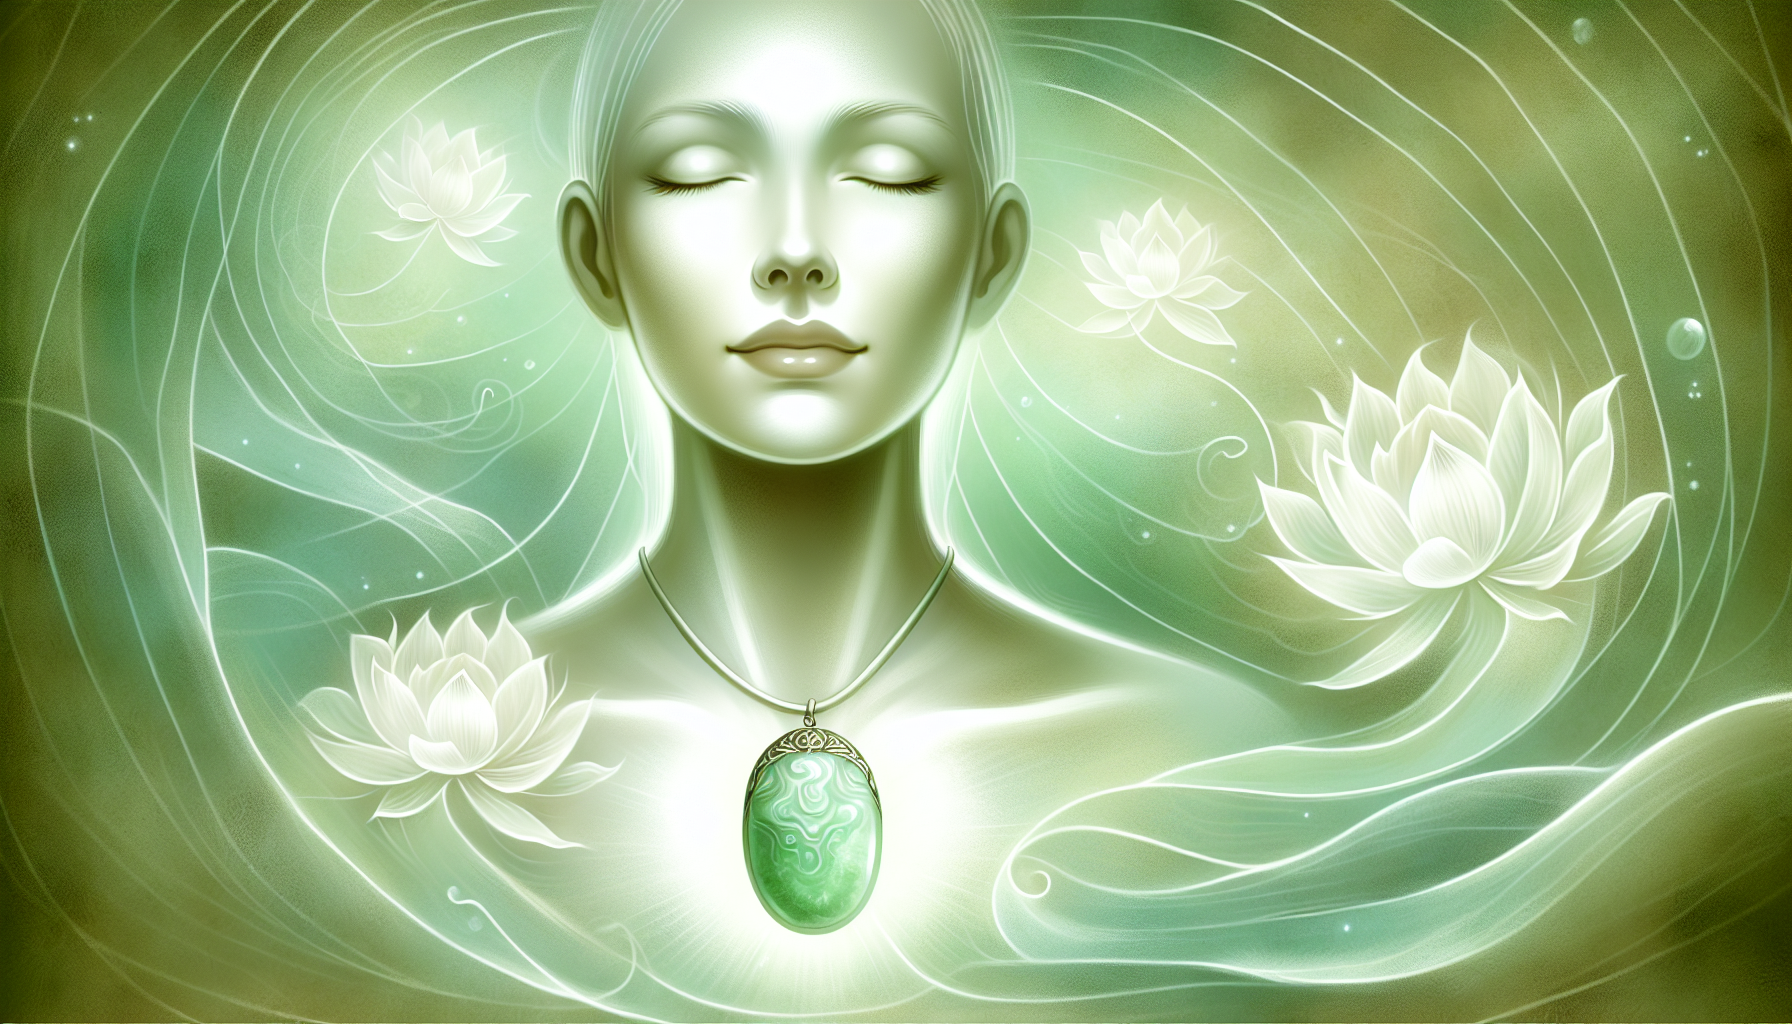 Illustration of a person experiencing inner peace and harmony while wearing a jade pendant